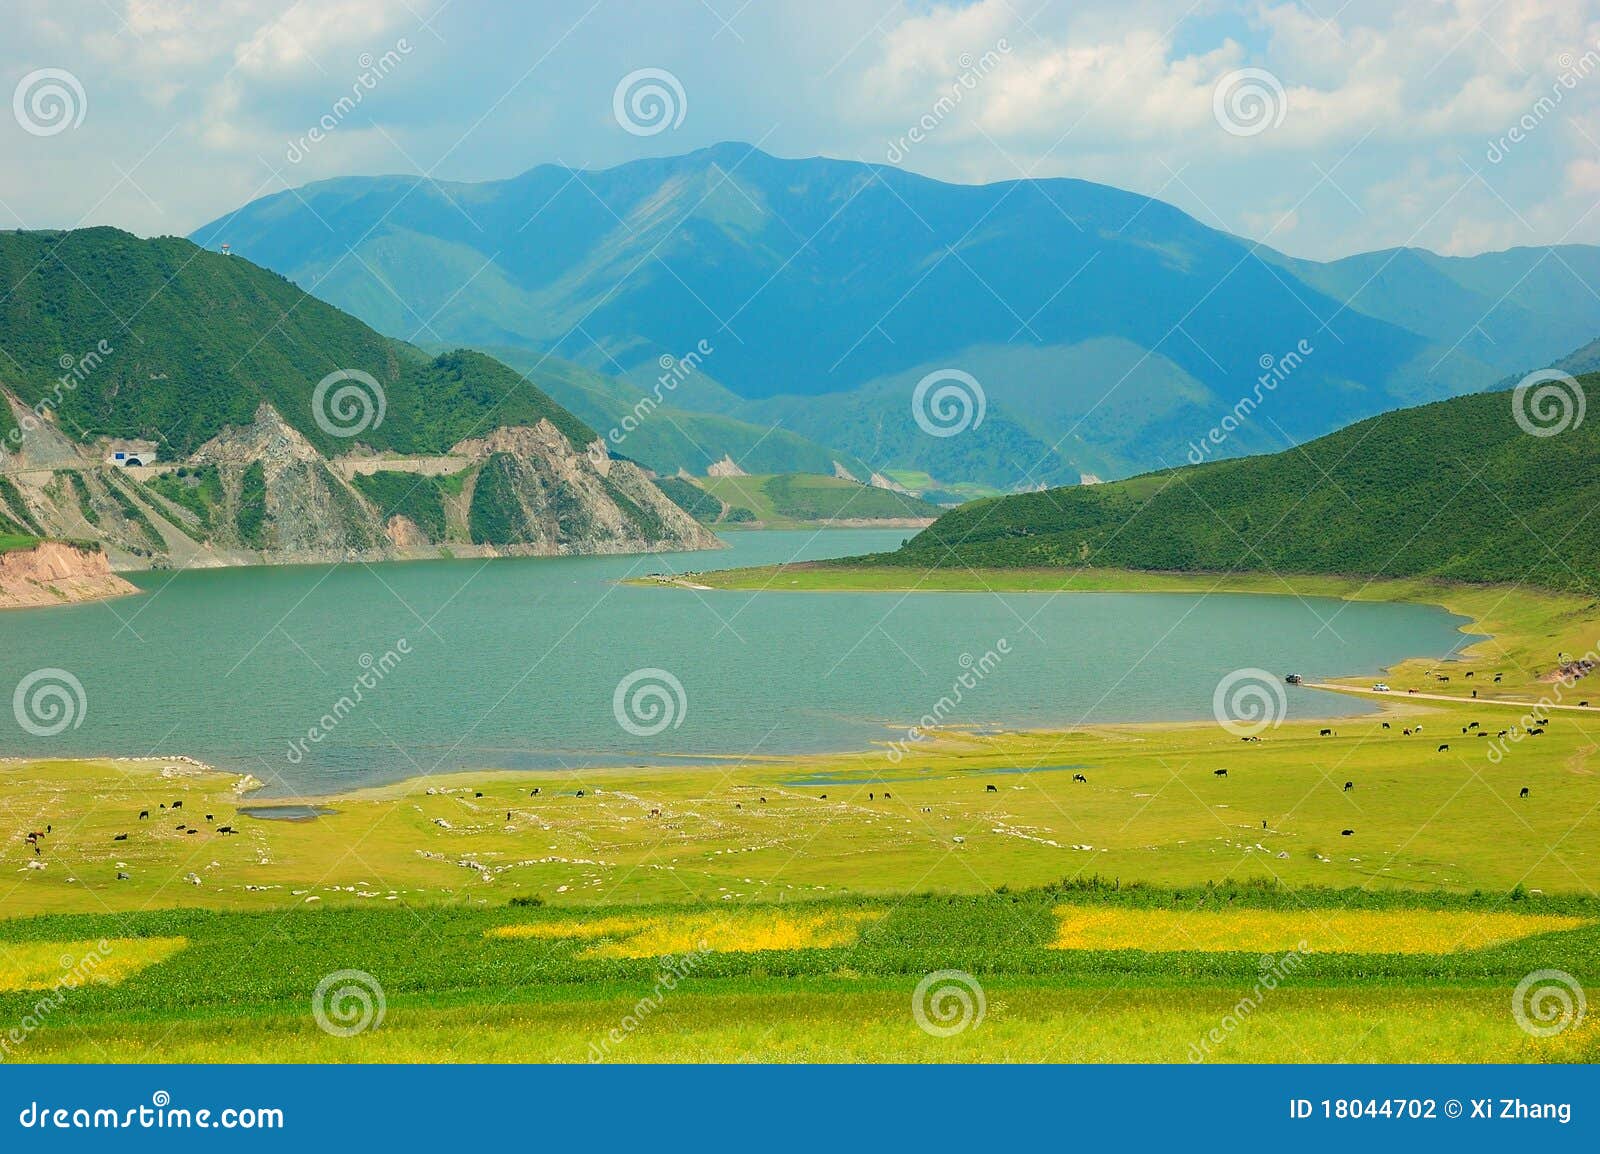 china qinghai flower and field landscape